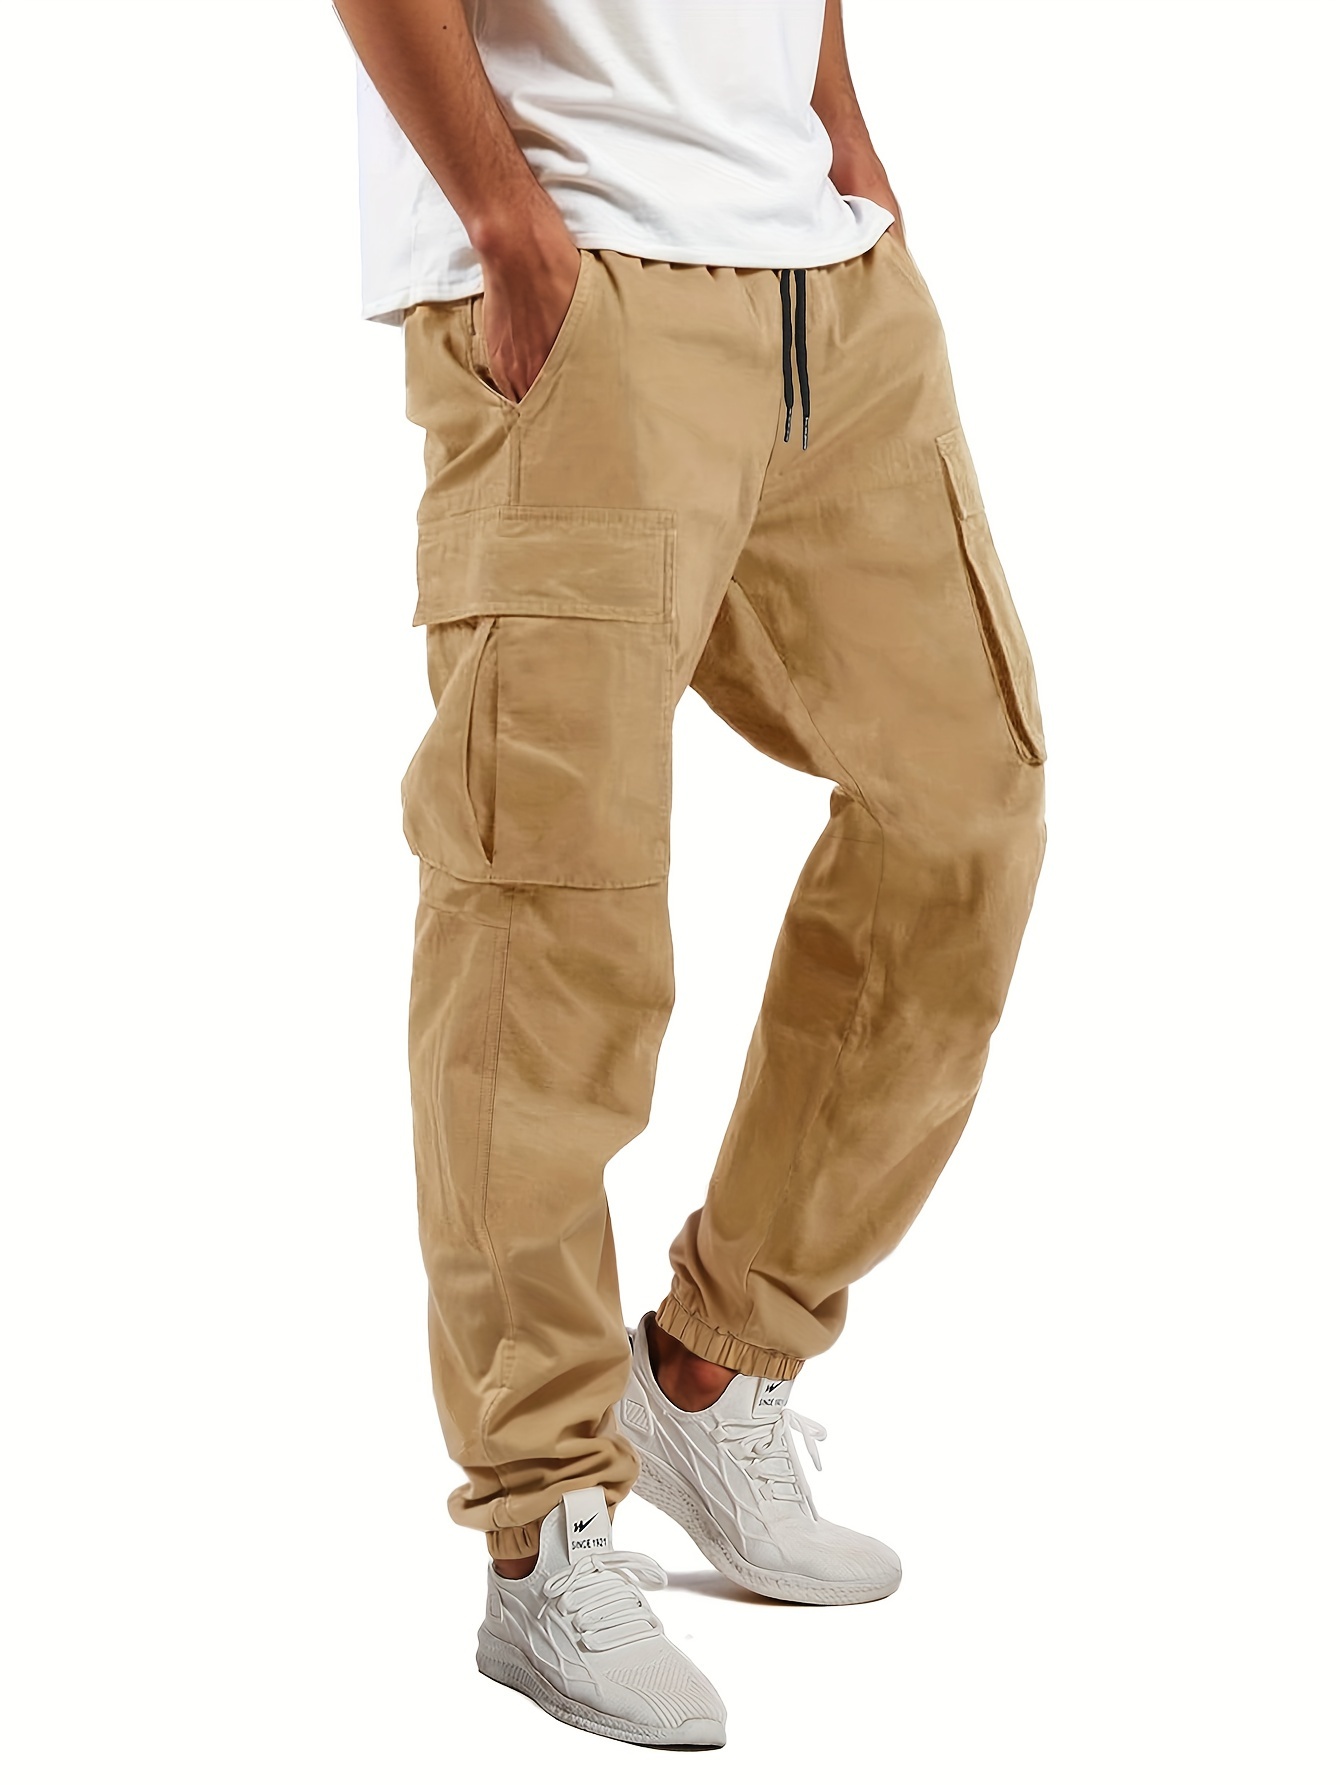 Mens Cargo Pants - Ultra-Relaxed Fit, Footed, Super Lightweight, Loose-fit, Ample Multiple Pockets - Timeless Basic Style, Fashionable, Perfect for Outdoor Activities, Ideal Work Pants